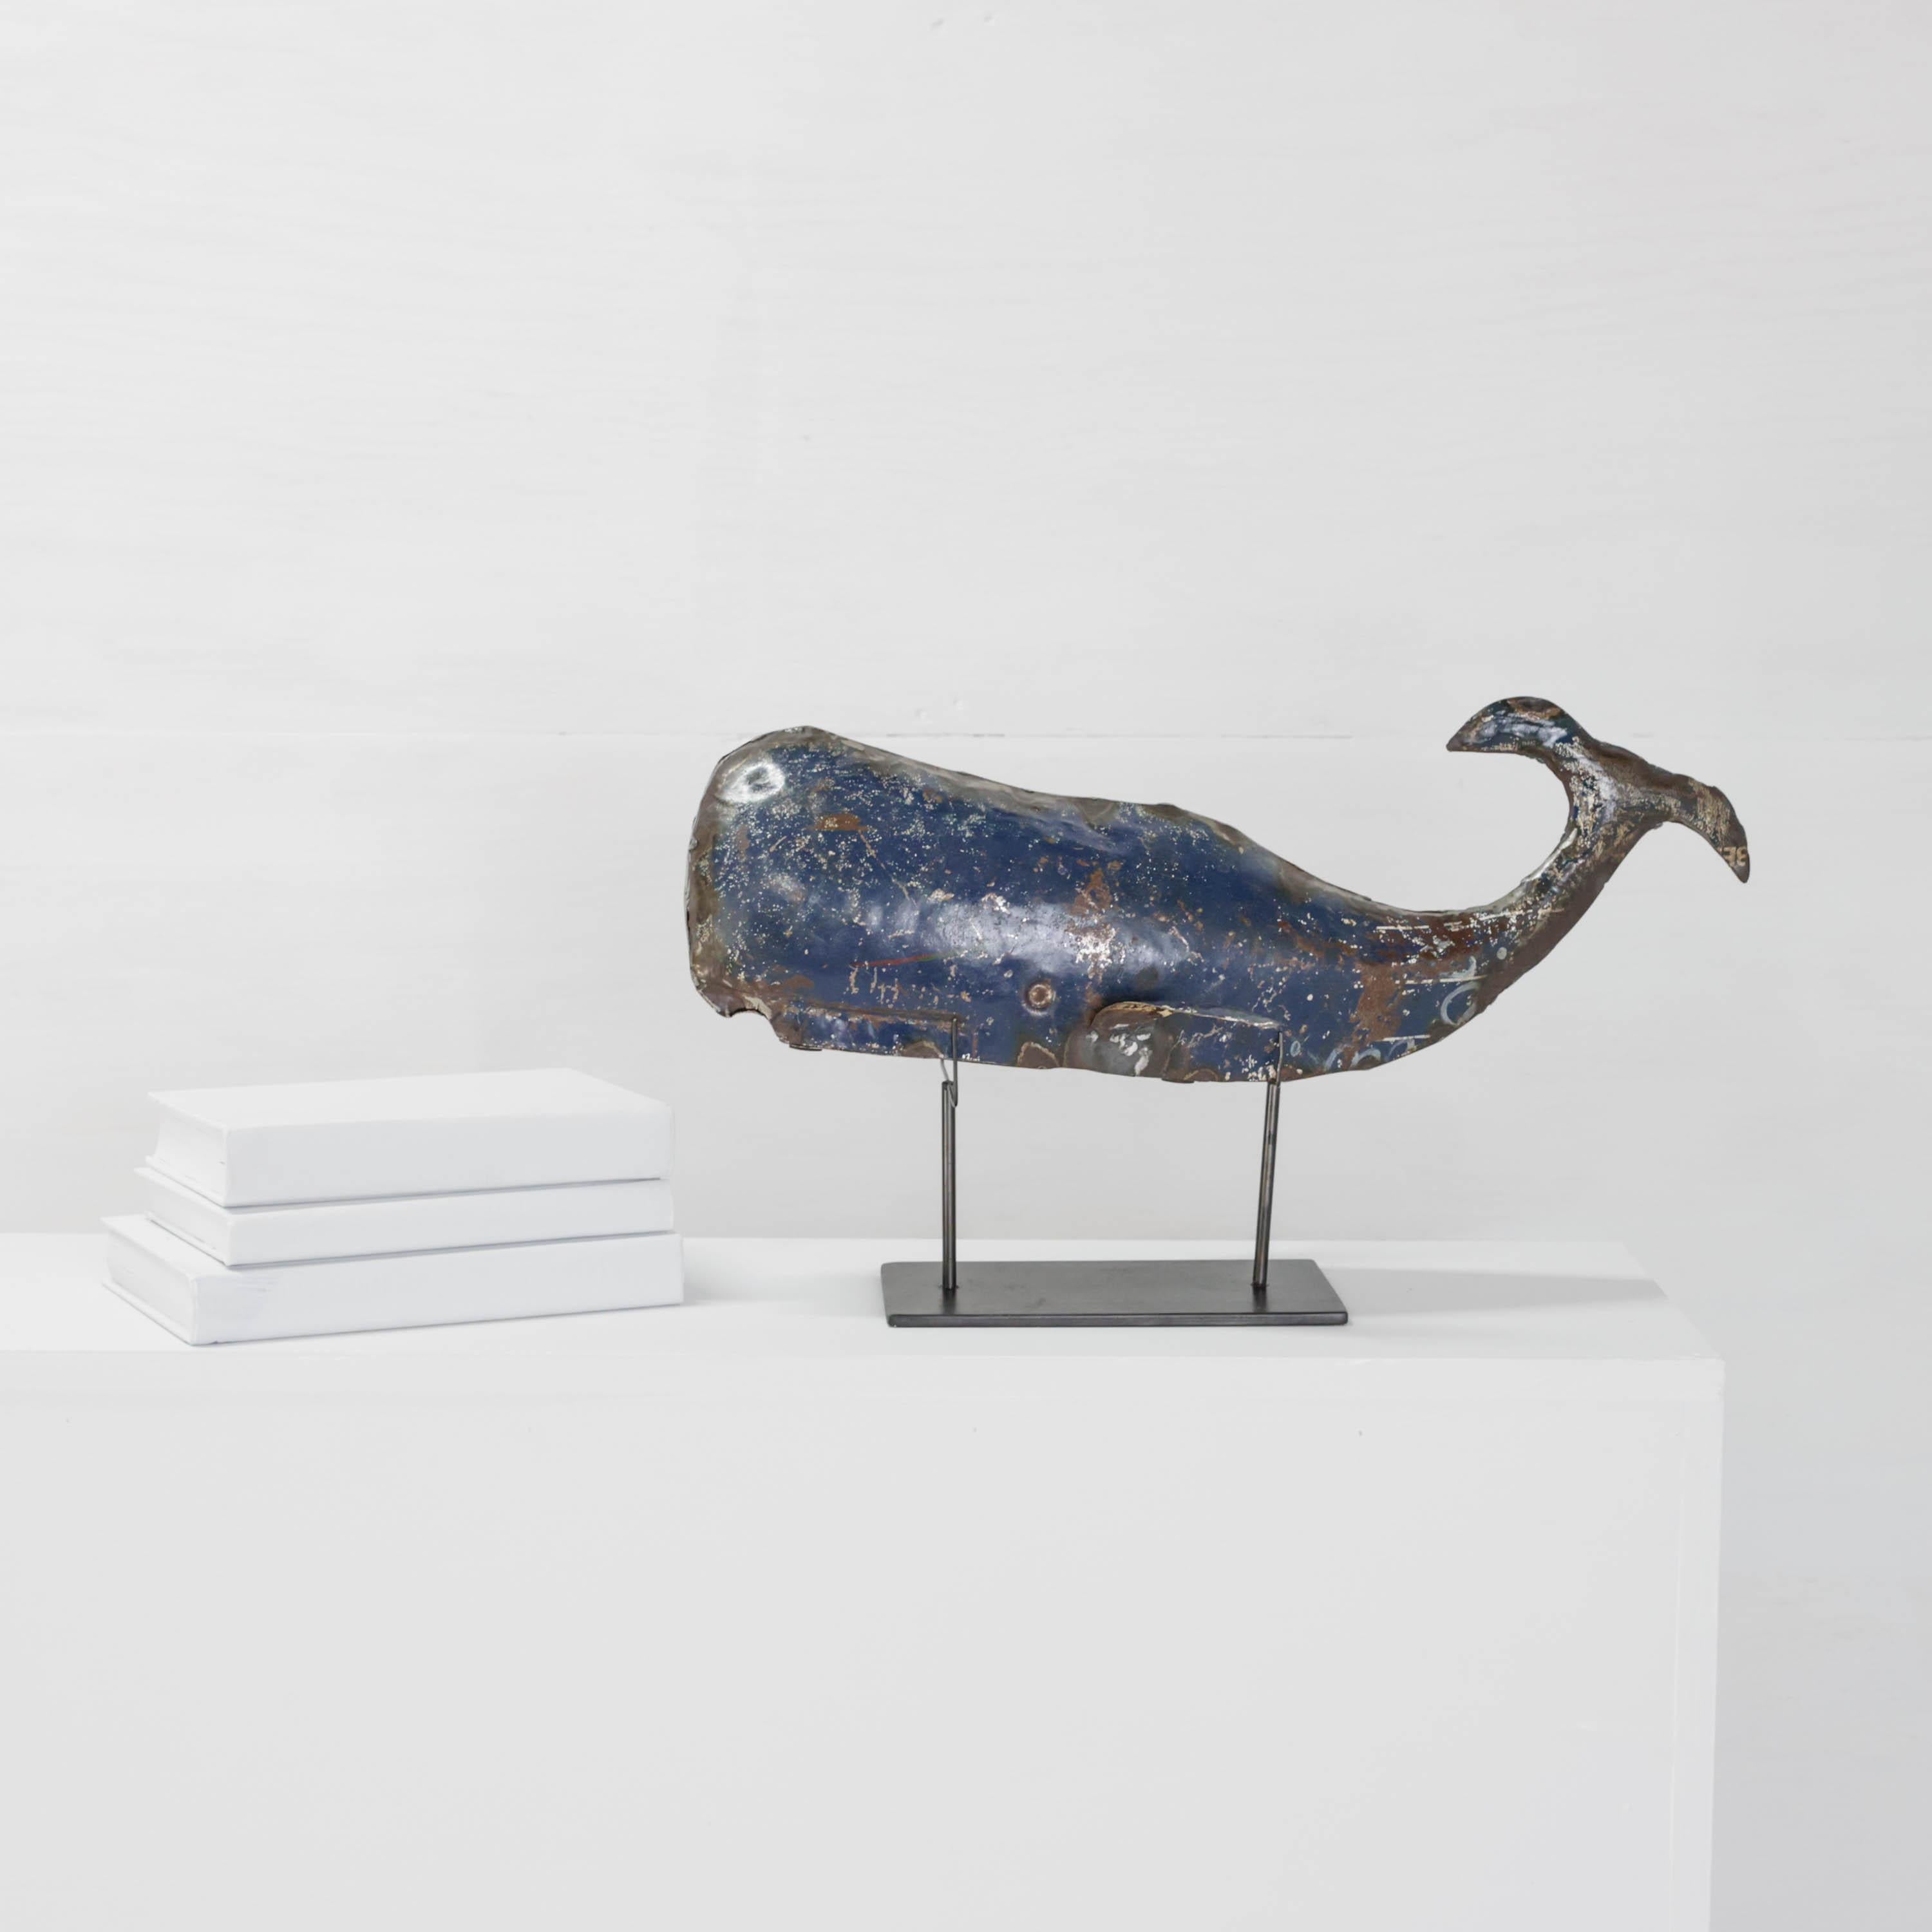 Midcentury Whale Sculpture on Stand, Circa 1960s For Sale 1